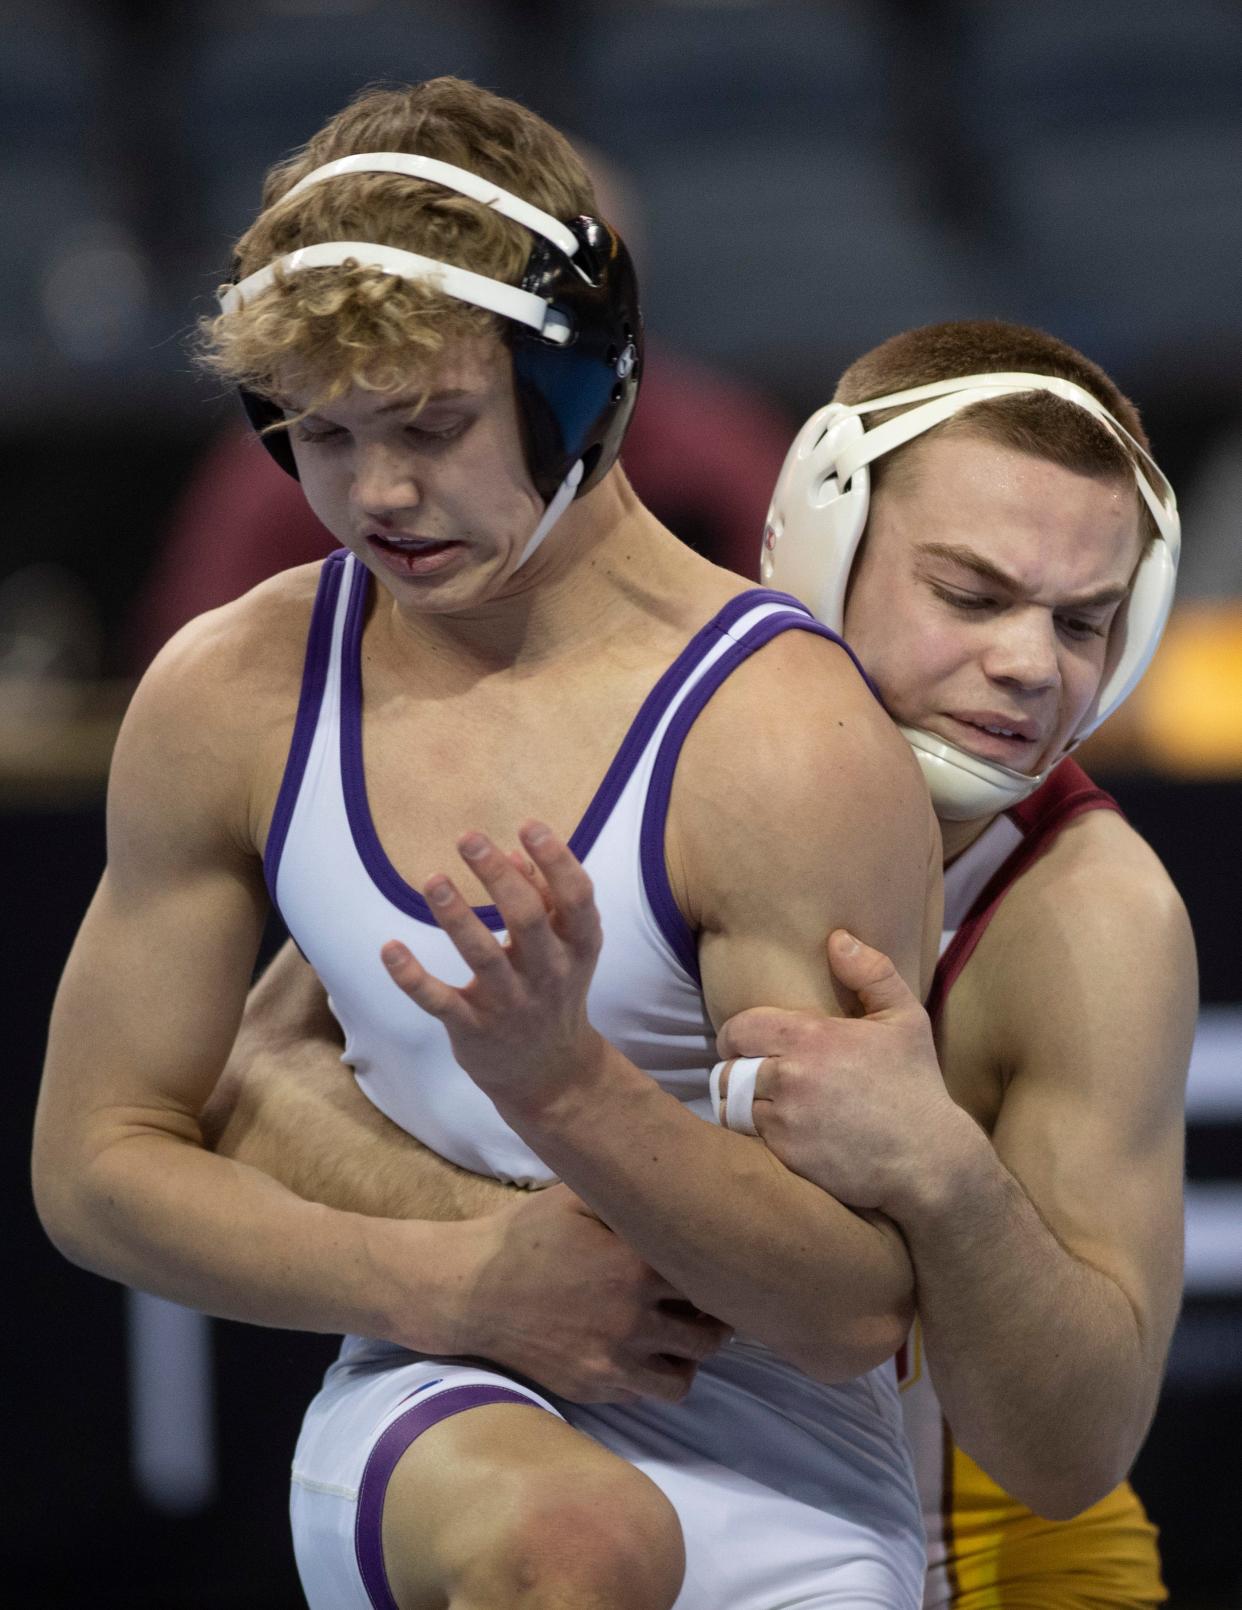 Brownsburg’s Braylon Reynolds and Evansville Mater Dei’s Isaiah Schaefer compete in the 126-pound championship match of the 2024 IHSAA Semi-State Wrestling tournament at Ford Center in Evansville, Ind., Feb. 10, 2024.